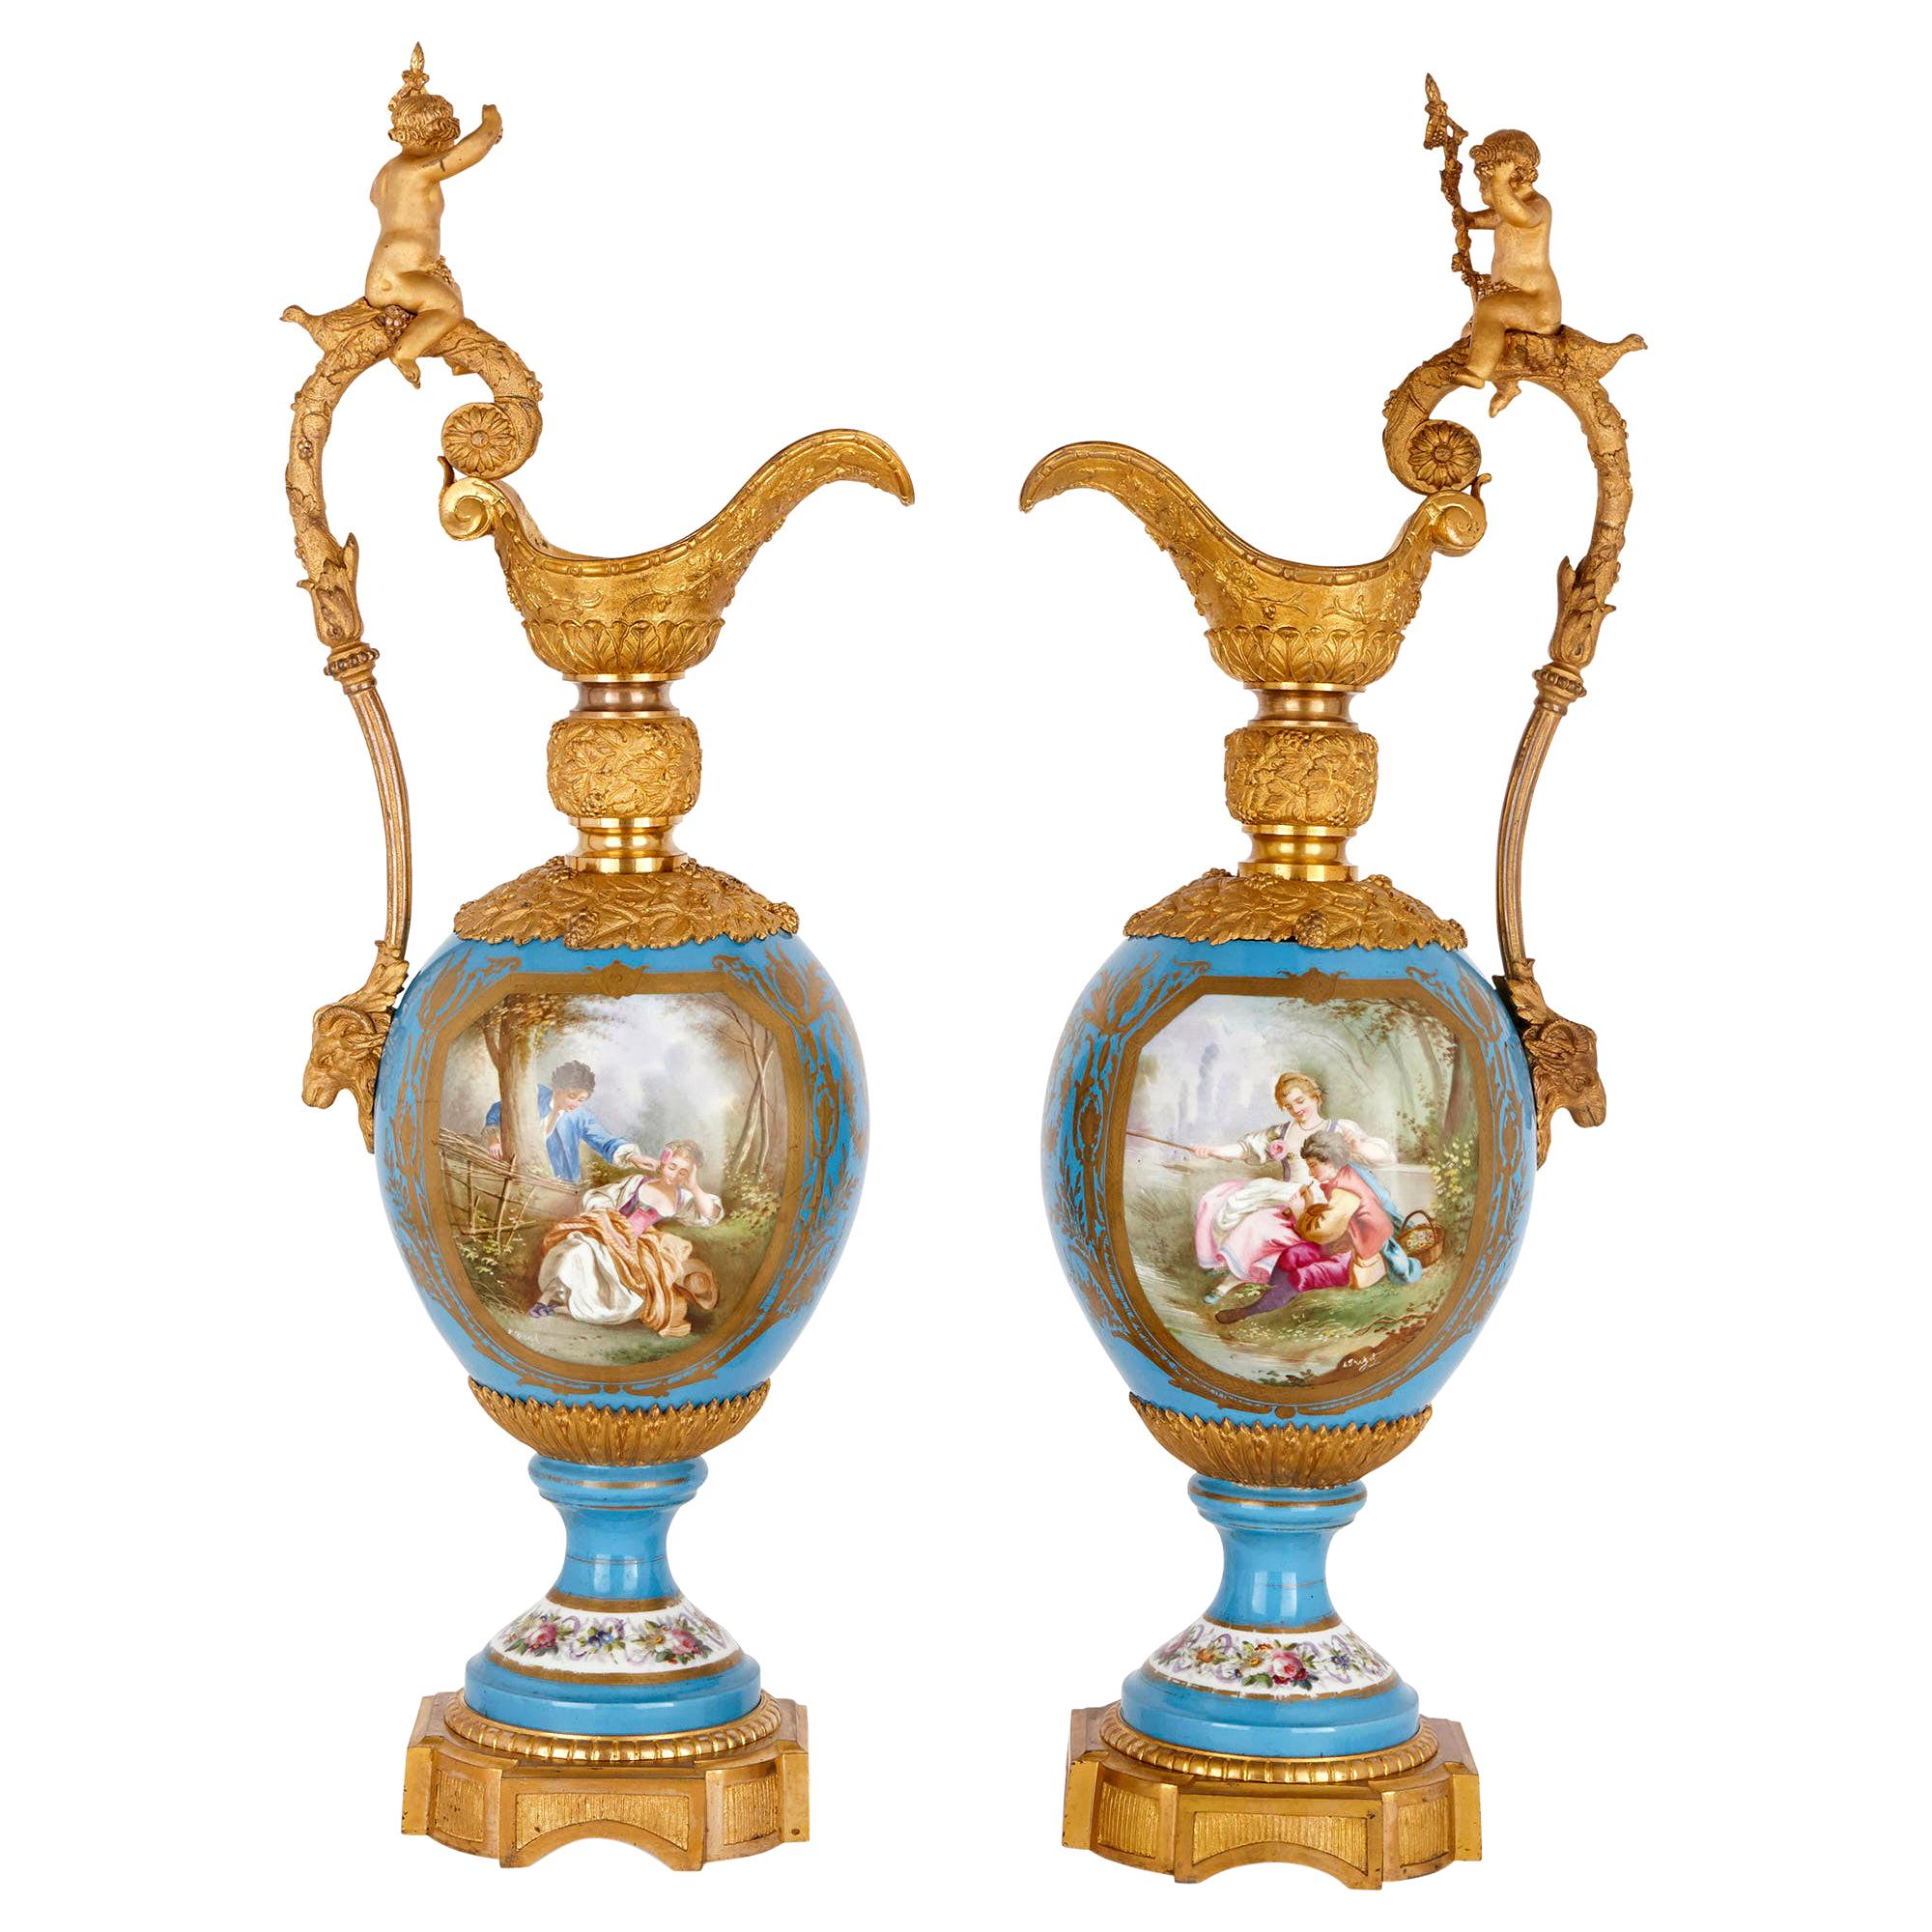 Two Large Rococo Style Porcelain and Gilt Bronze Jugs For Sale